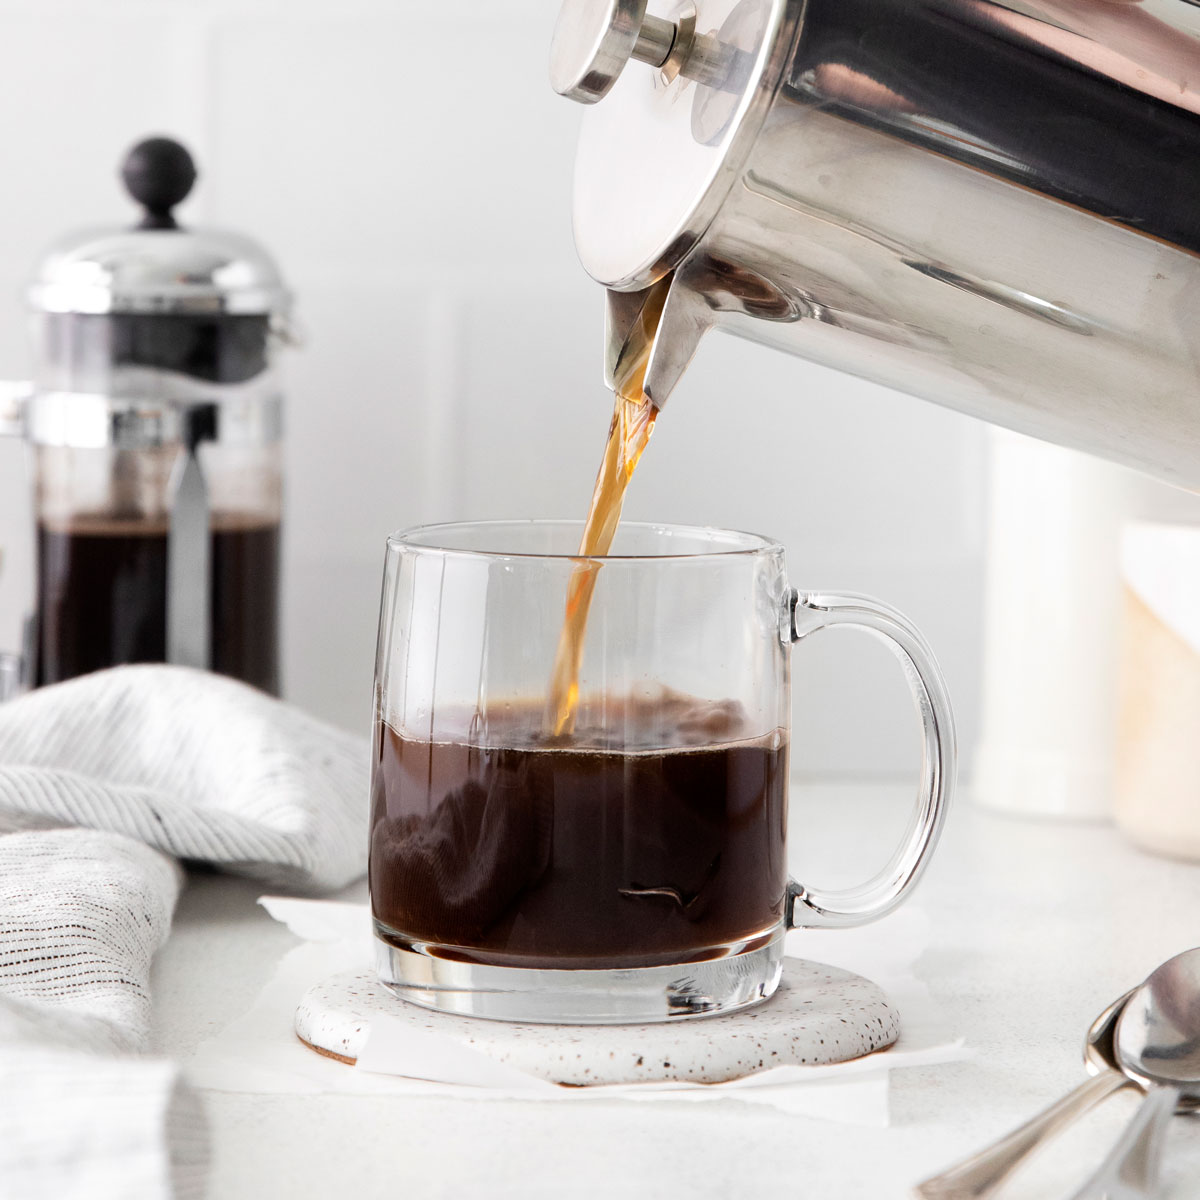 https://www.texanerin.com/content/uploads/2022/05/french-press-cold-brew-image-1200.jpg